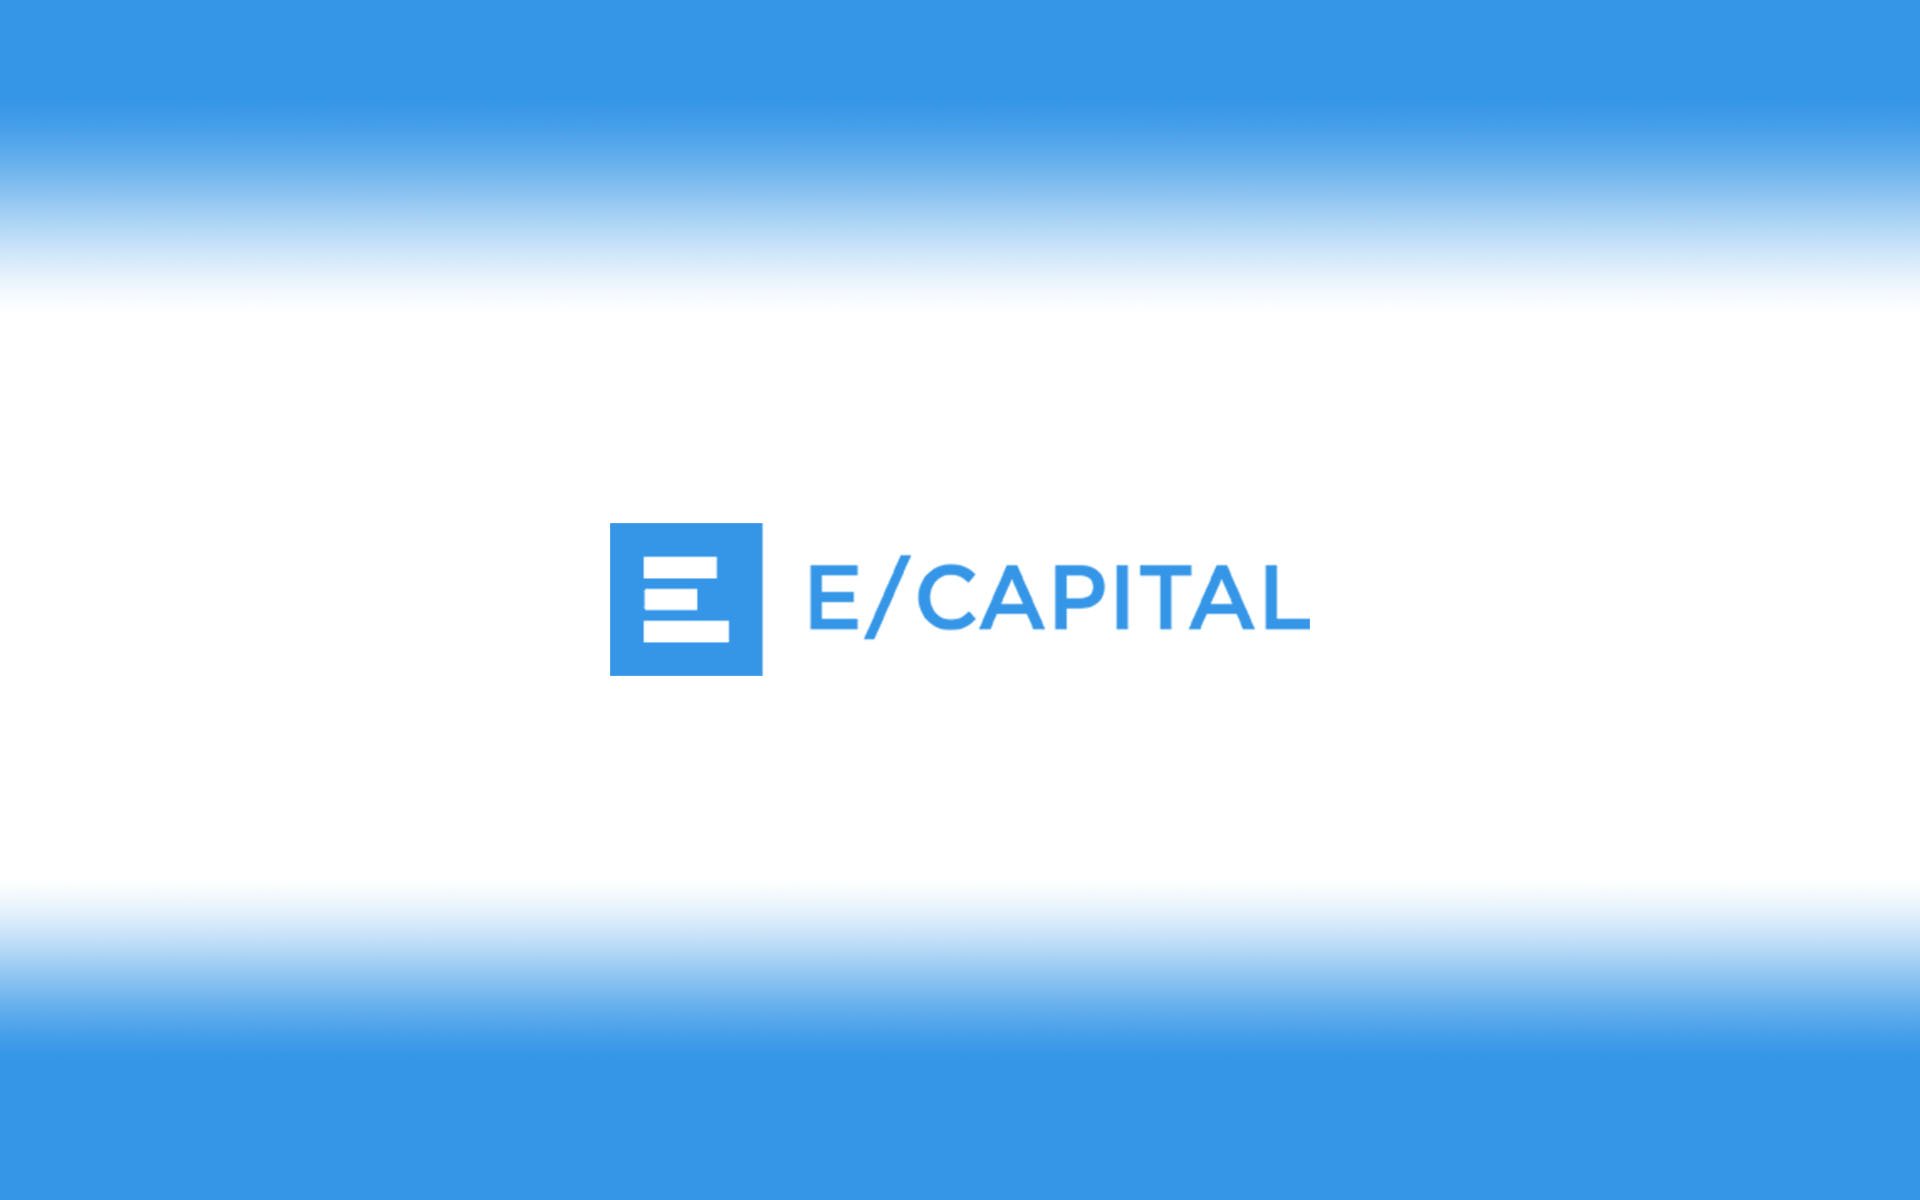 ECAPITAL.CO Launches Pre-Sale For ICO Backed By Revolutionary Cryptocurrency Exchange That Will Include eWallet & International Prepaid Card